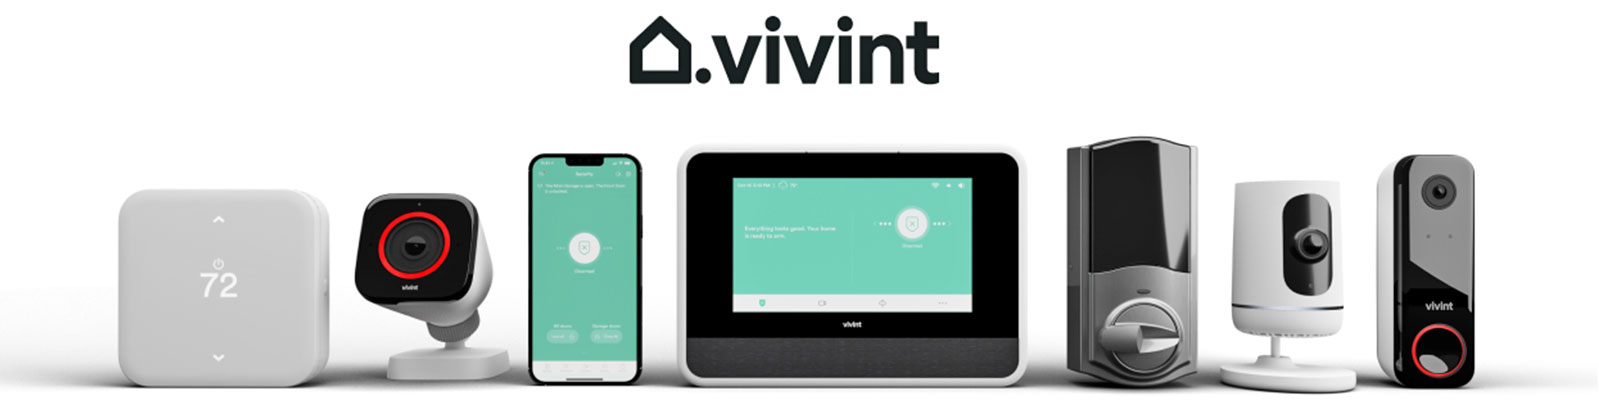 Vivint Logo and their home security devices lined up